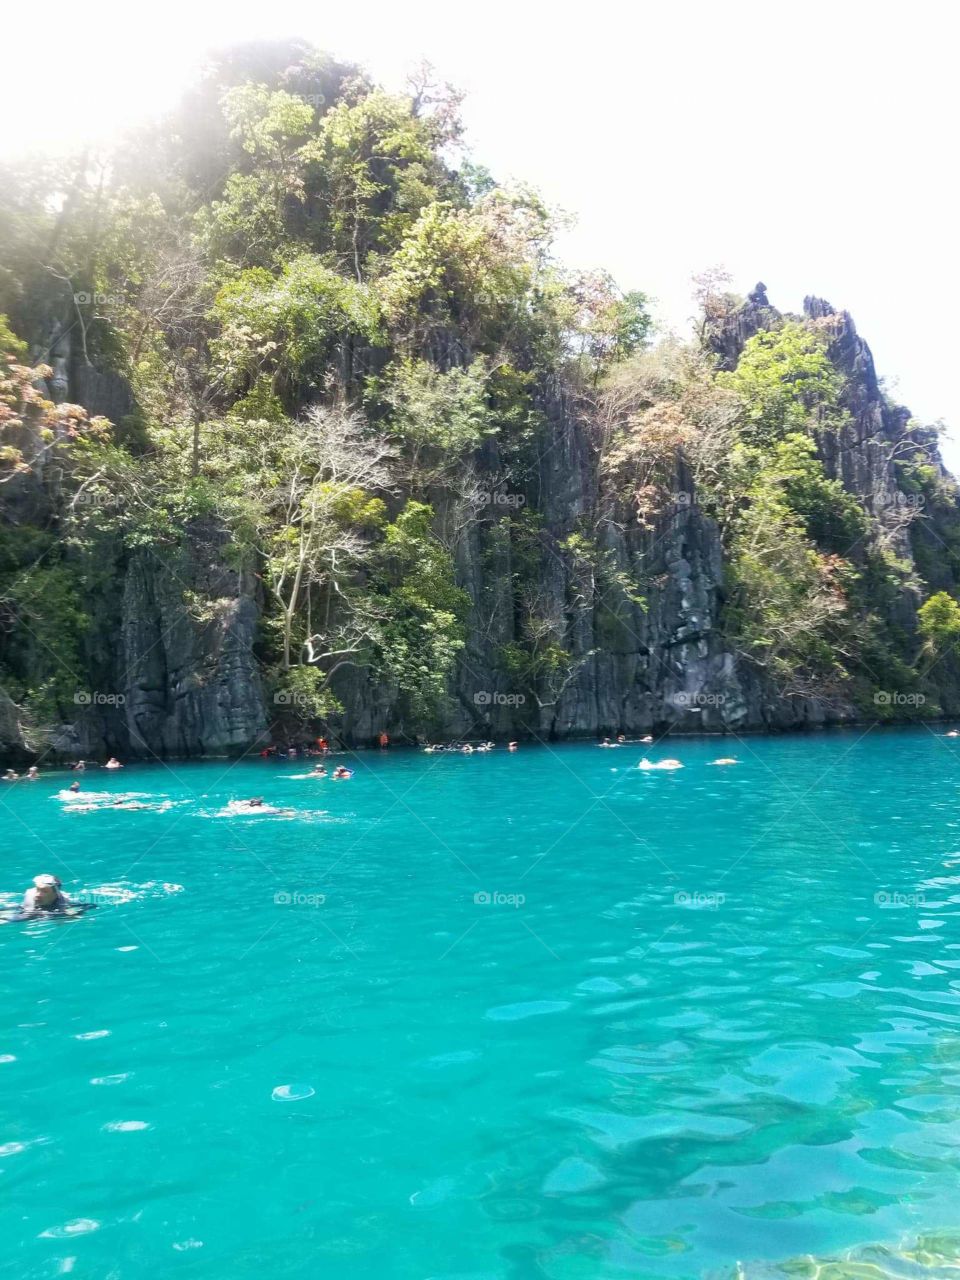 Mother Nature is indeed beautiful.Kayangan Lake in Coron Palawan, Philippines. You have to climb 150 steps and another 150 steps down to get to this hidden lagoon and vice versa. Worth it!